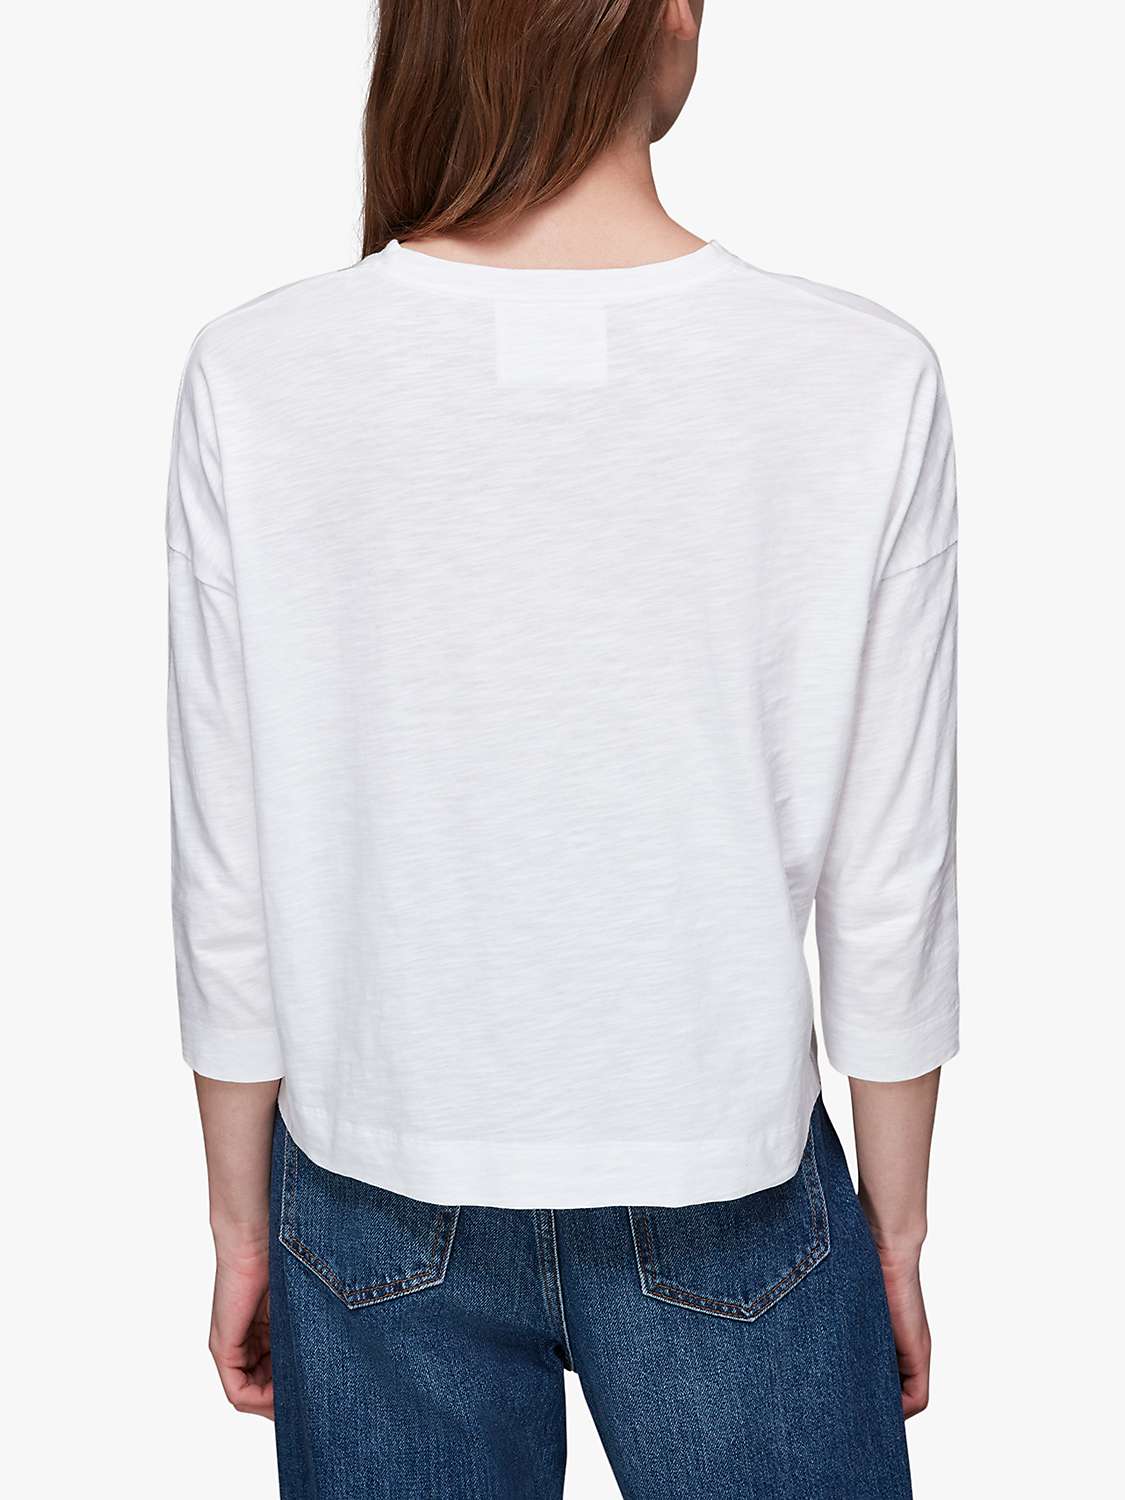 Buy Whistles Organic Cotton Patch Pocket T-Shirt Online at johnlewis.com